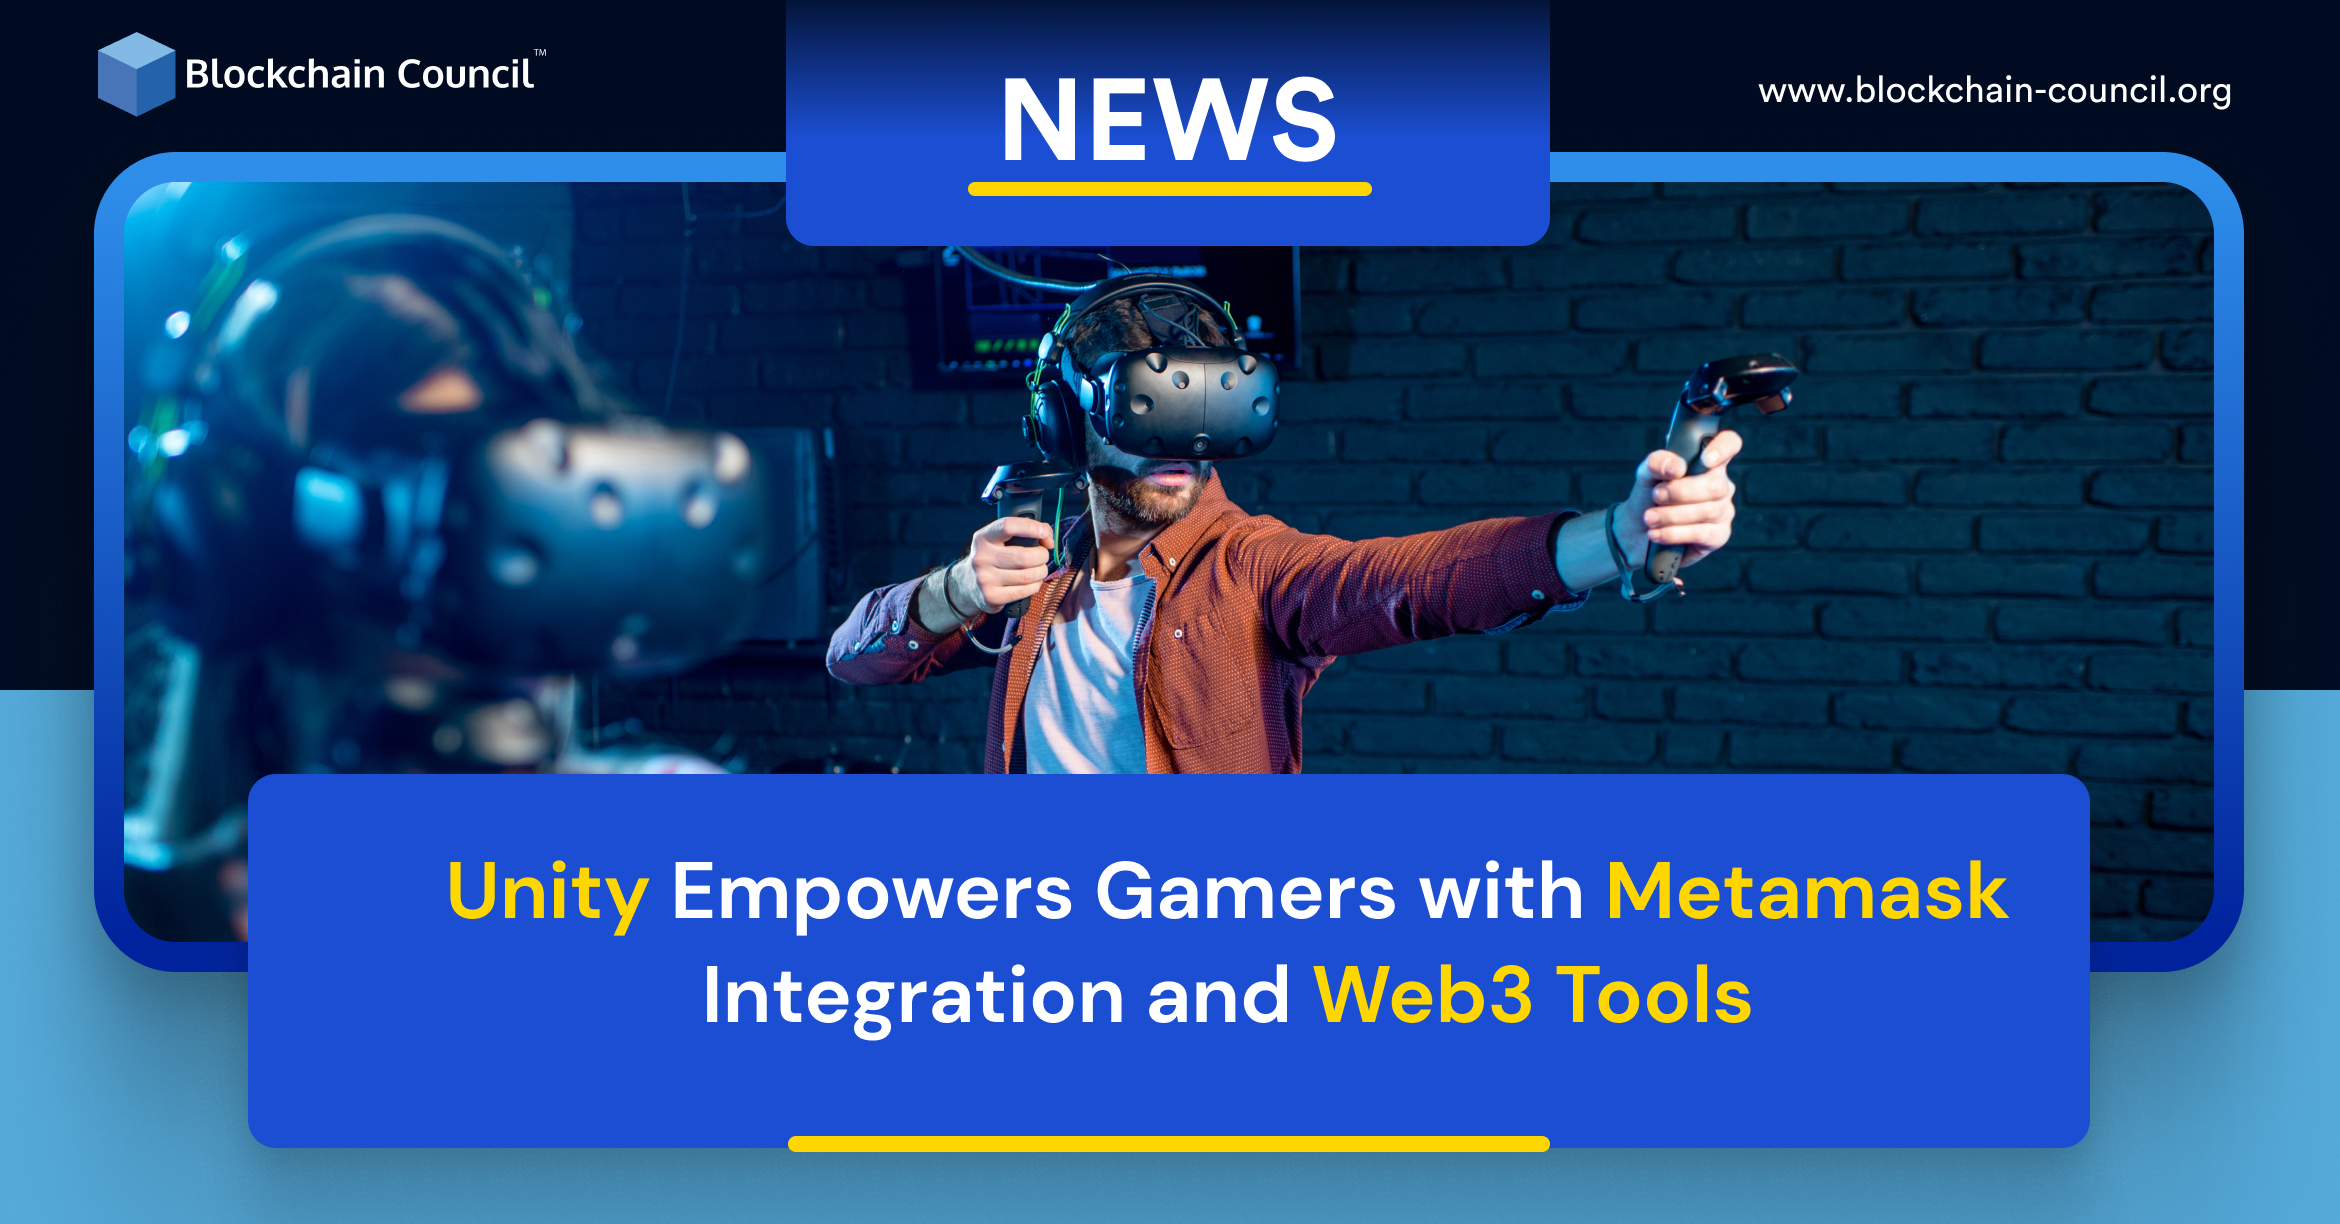 Unity Empowers Gamers with Metamask Integration and Web3 Tools